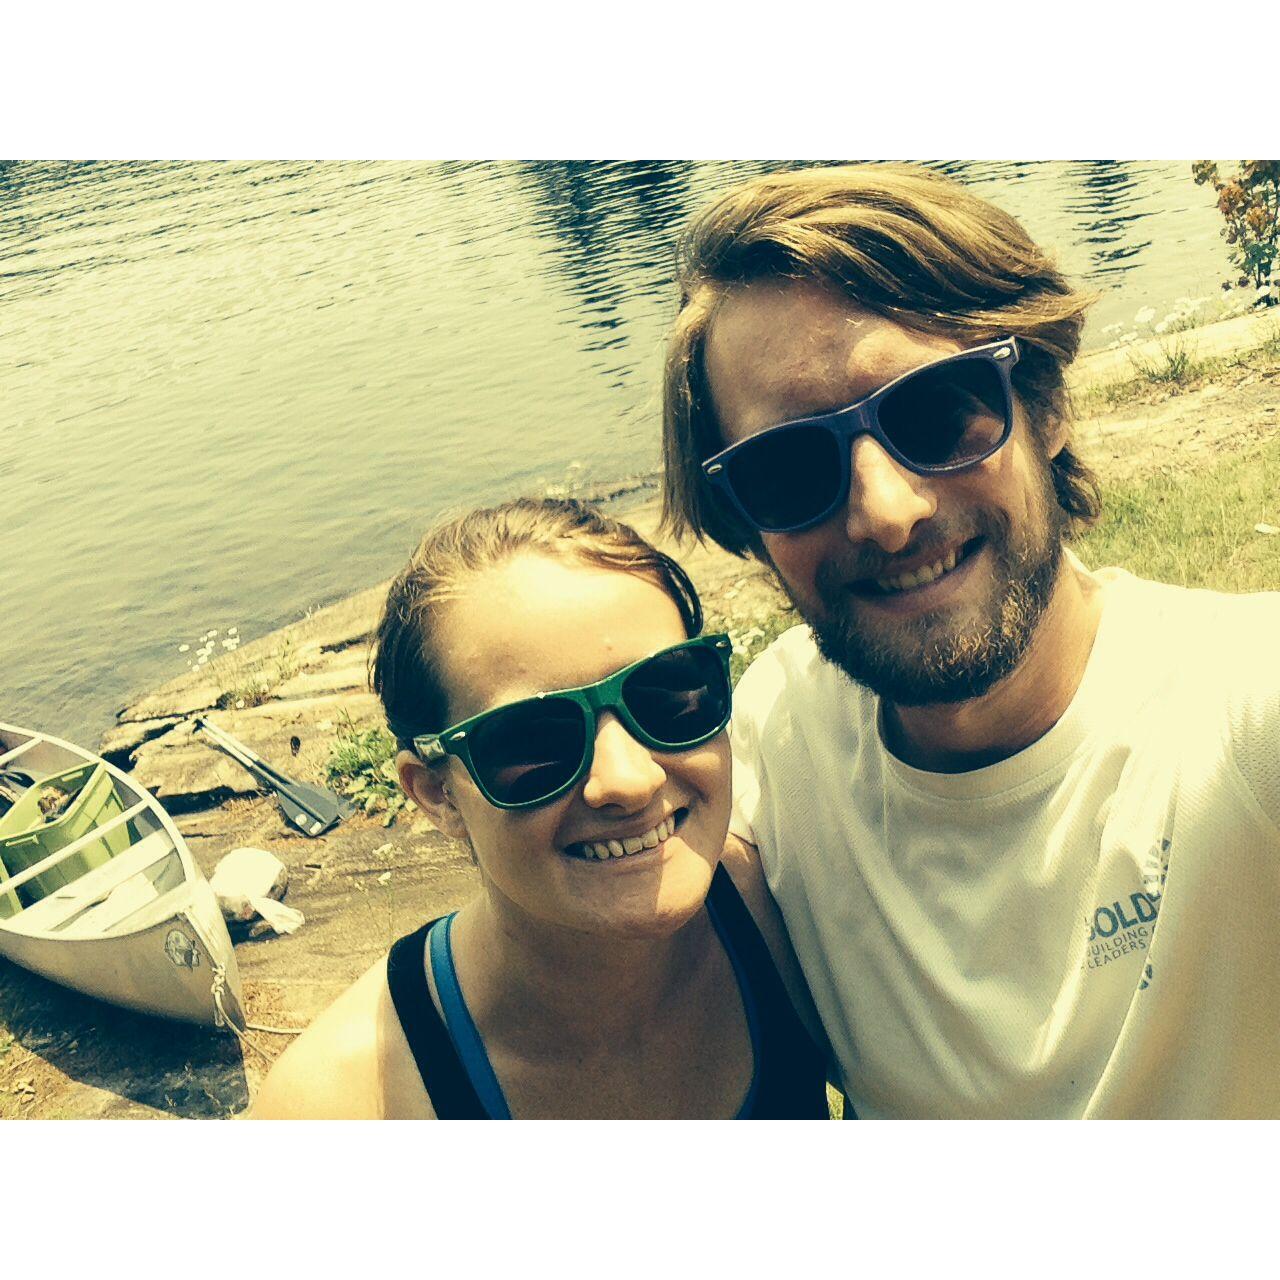 On a canoe trip in the Adirondacks - our first outdoor adventure together (with many more to come!)